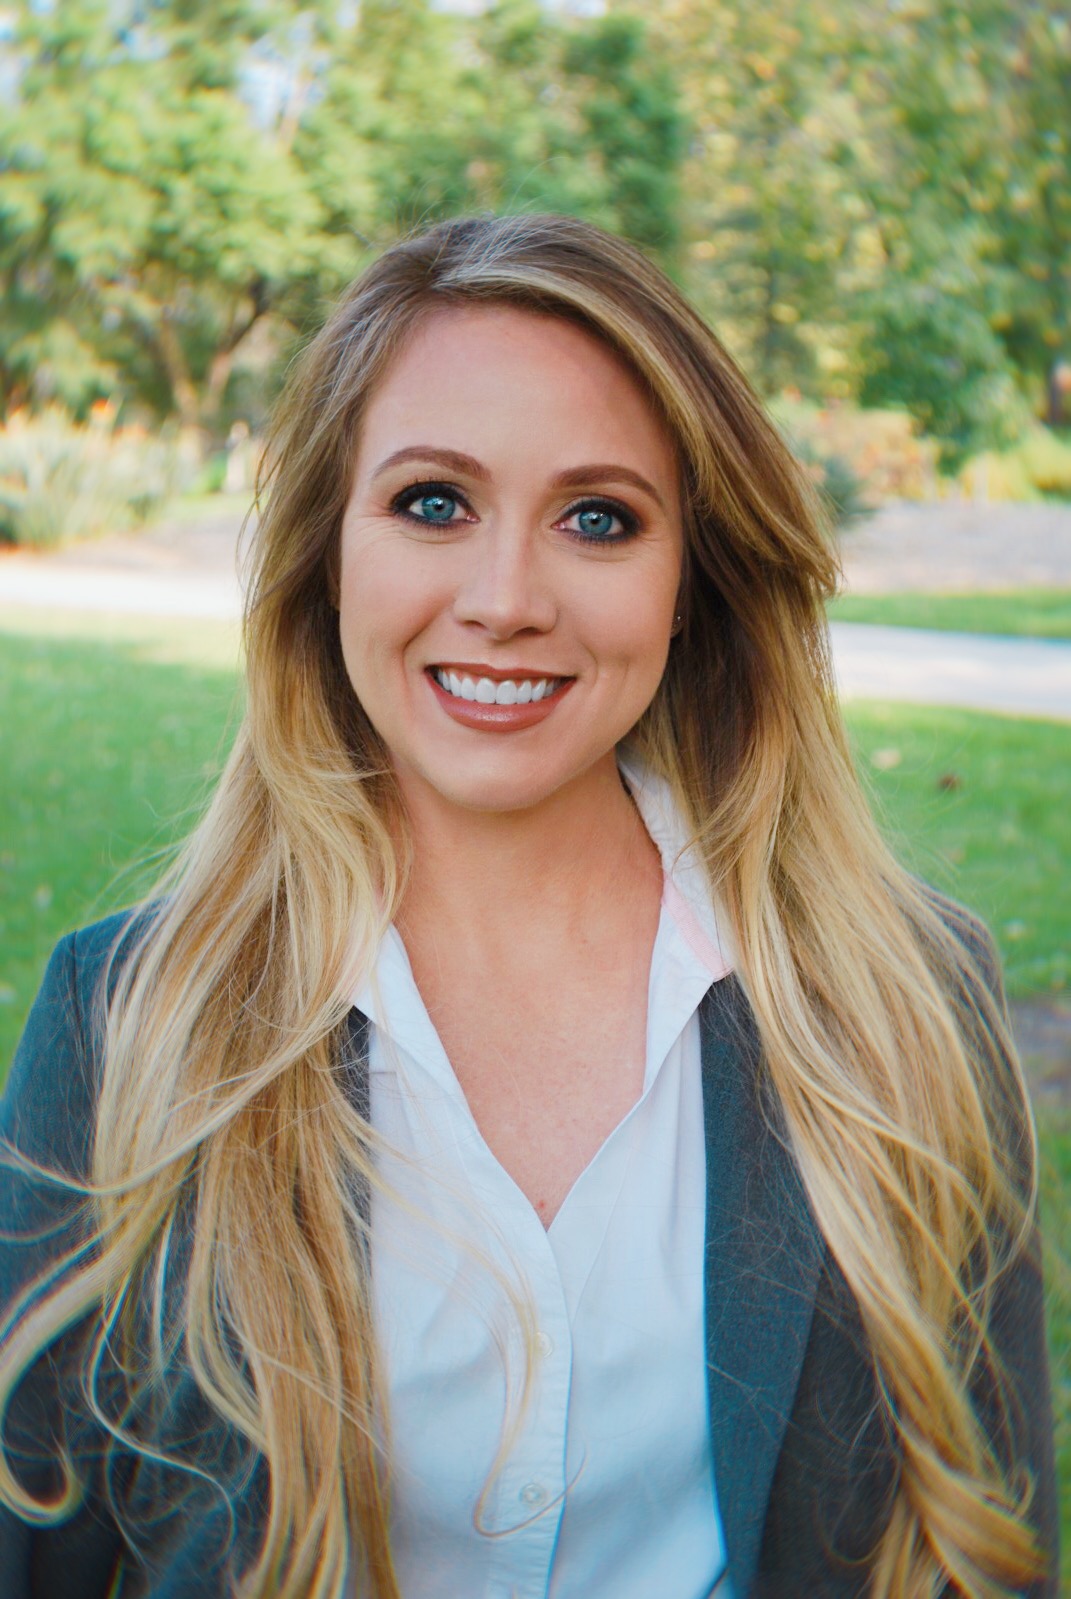 A woman with long blonde hair and blue eyes is smiling, standing outside in a park, wearing a white shirt and a grey blazer, perhaps on her way to a networking event.